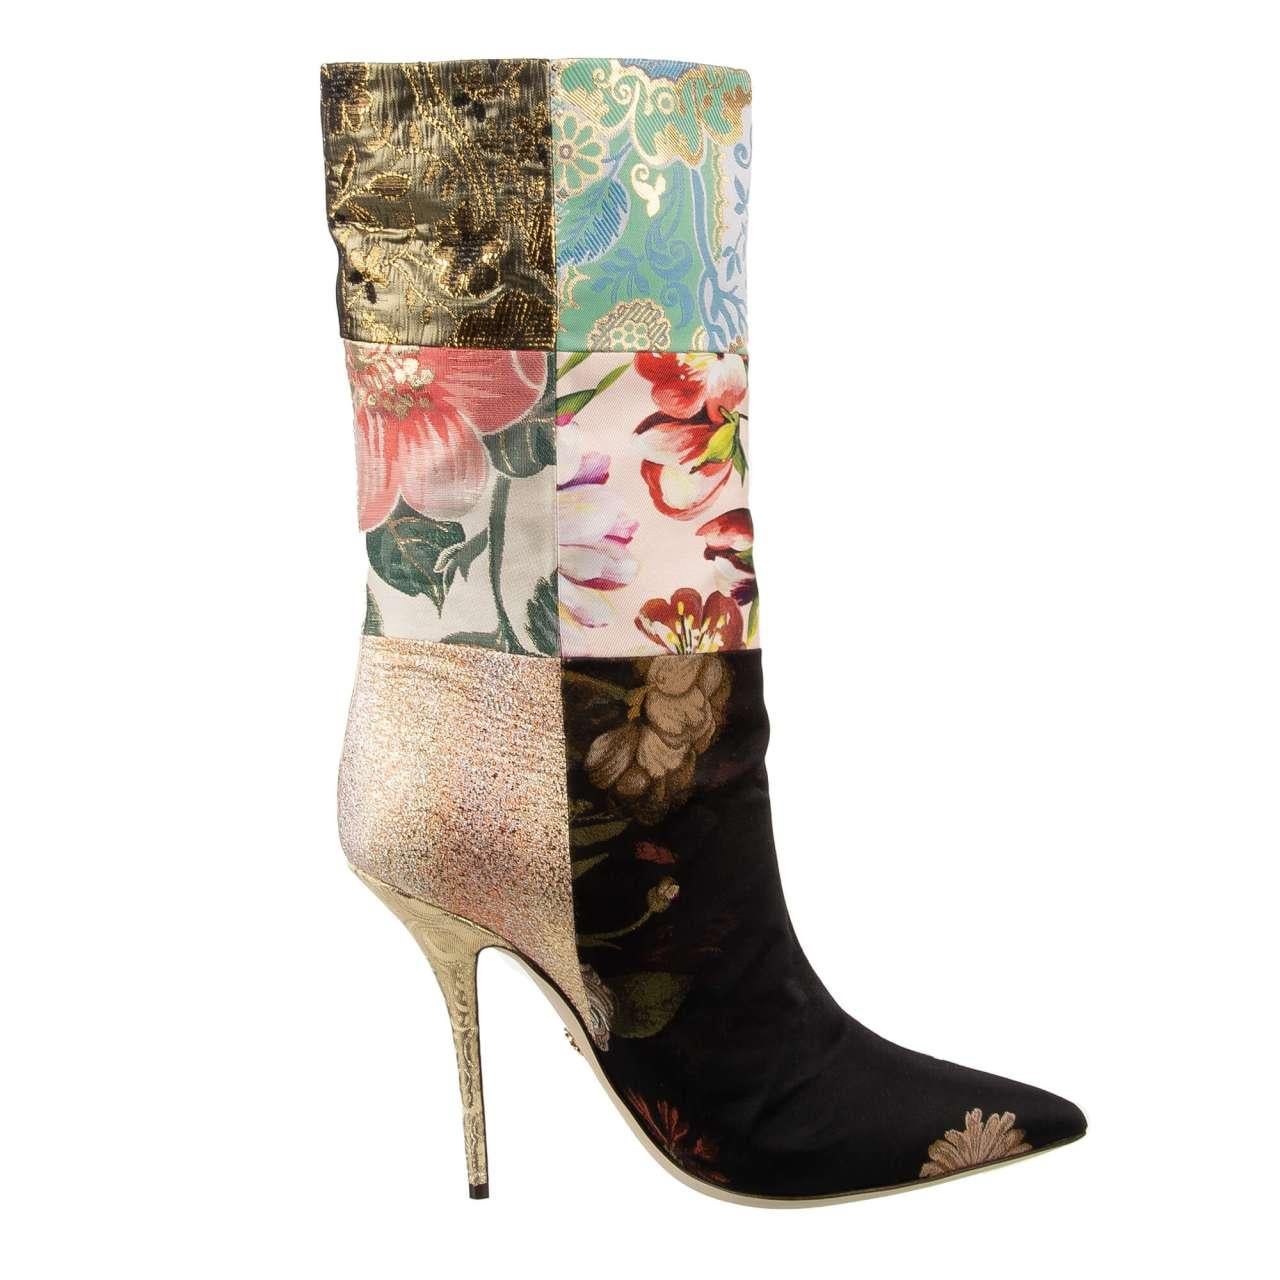 - Pointed floral brocade patchwork Boots CARDINALE in gold and pink by DOLCE & GABBANA - New with Box - MADE IN ITALY - Model: CT0735-AO657-80995 - Material: 64% Polyester, 22% Silk, 12% Lurex, 2% Nylon - Inner Material: Leather - Sole: Leather -